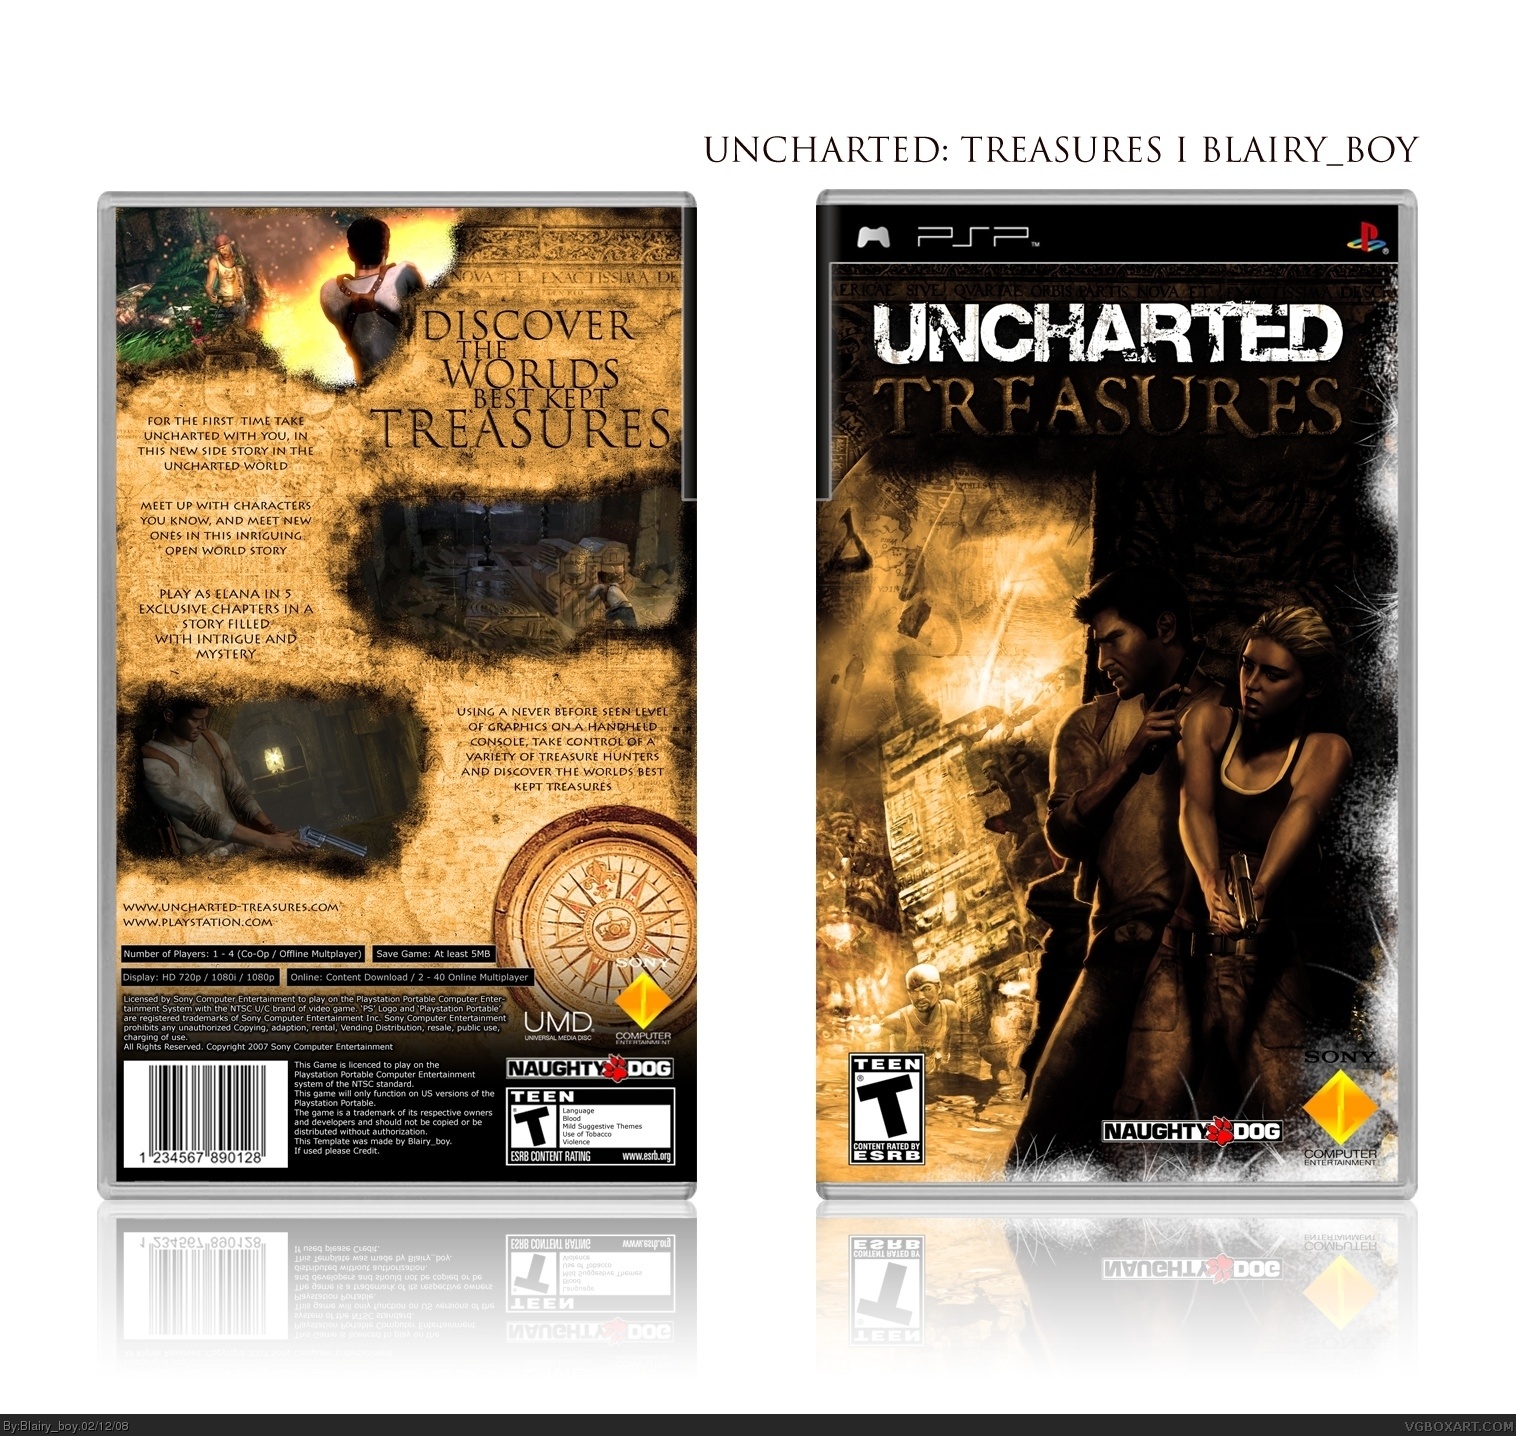 Uncharted: Treasures box cover